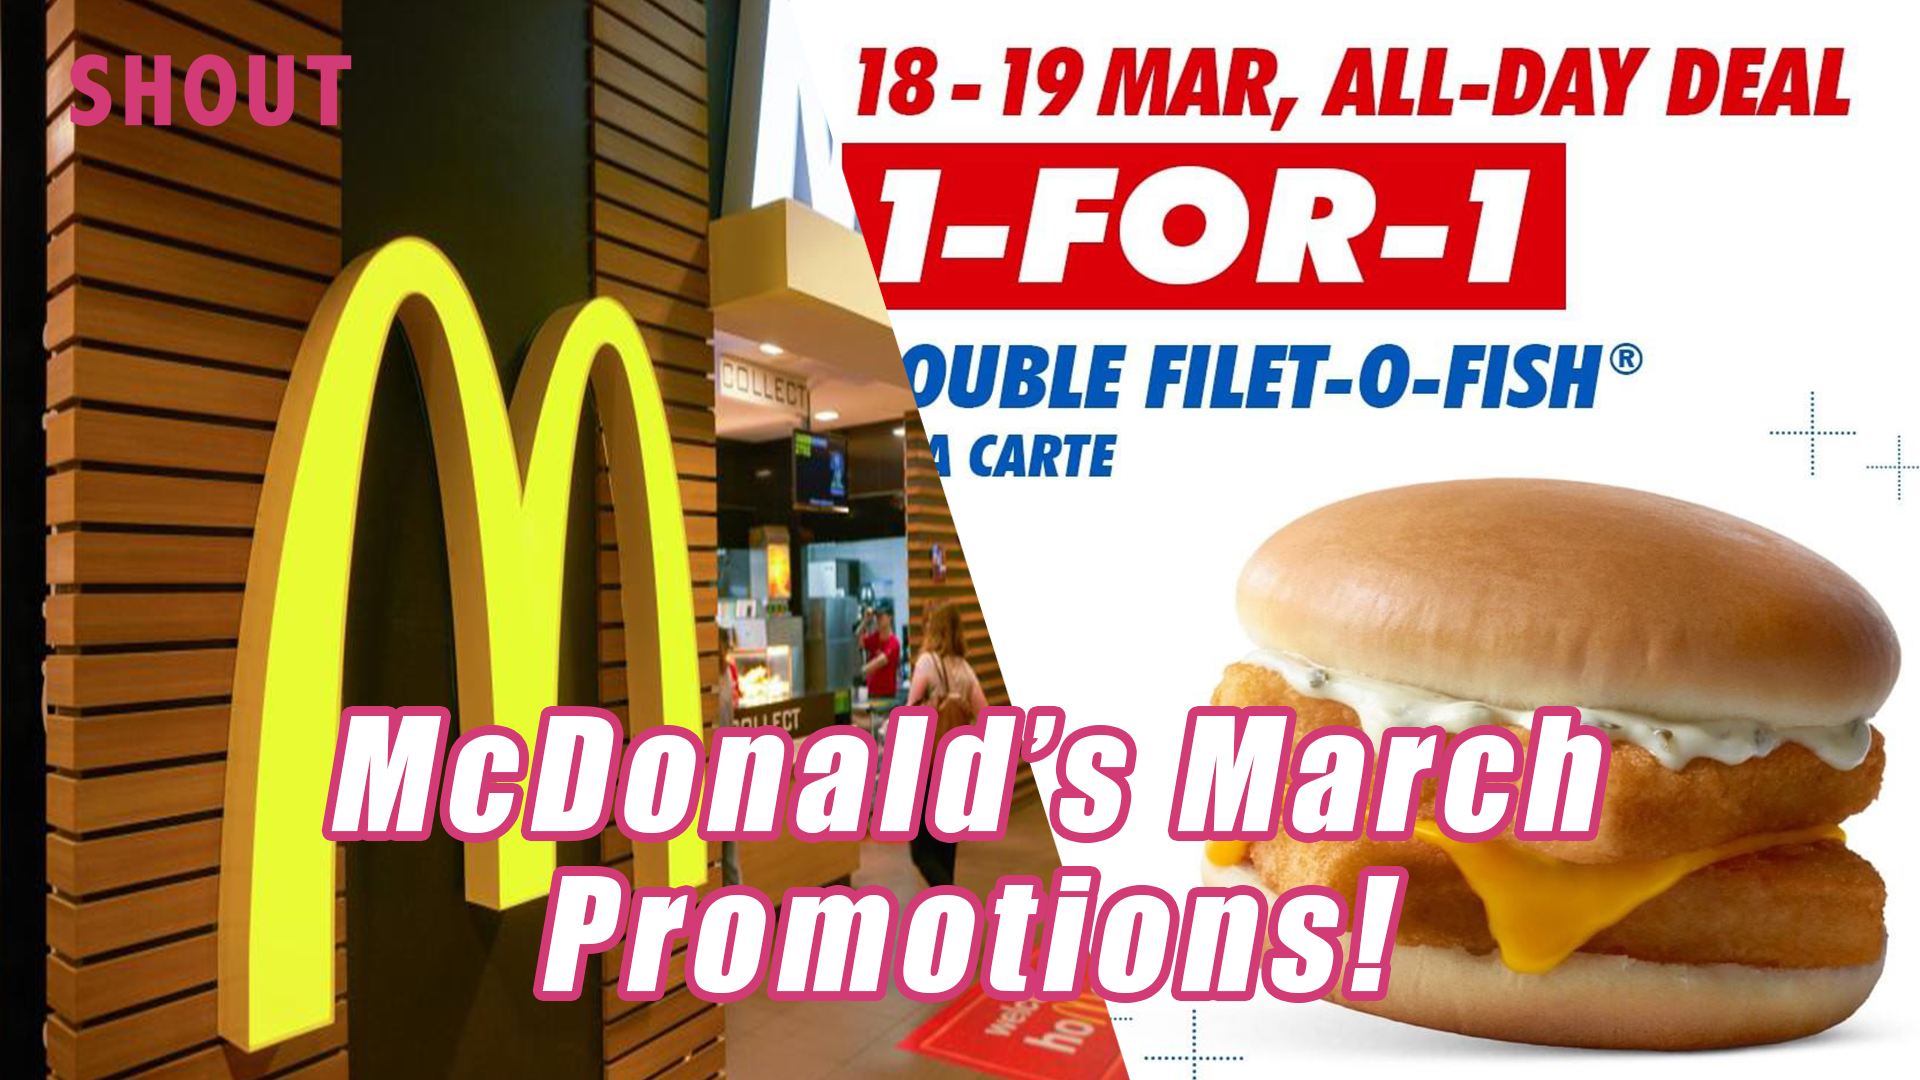 McDonald’s NeverEnding Rollout of March Promotions! Shout